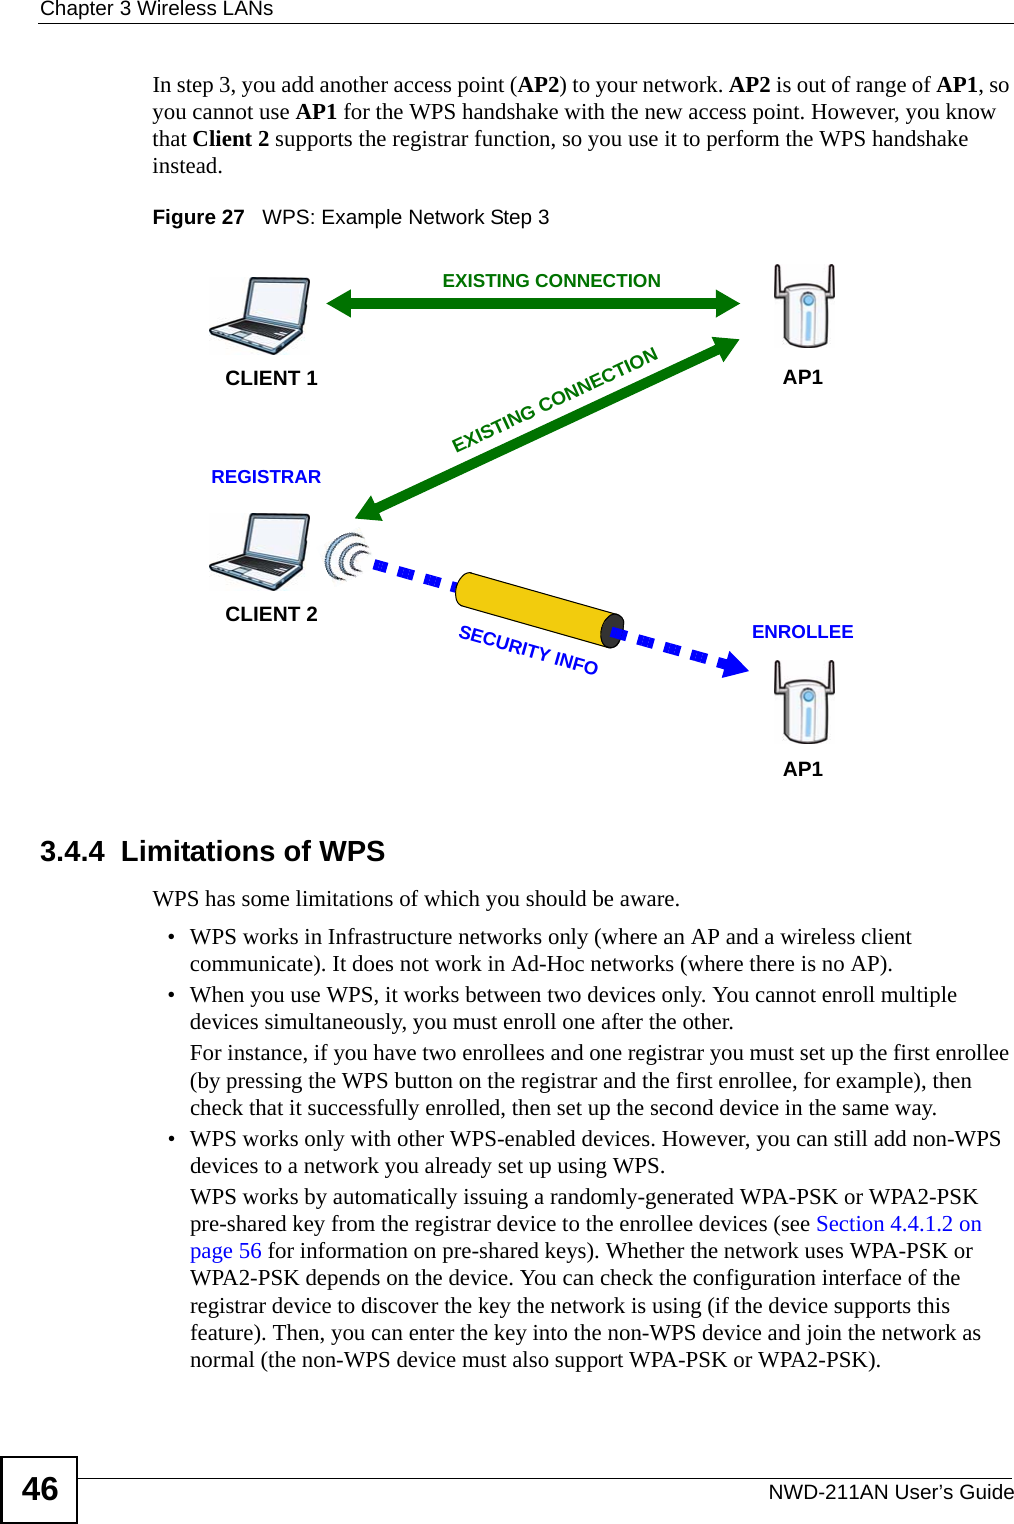 Chapter 3 Wireless LANsNWD-211AN User’s Guide46In step 3, you add another access point (AP2) to your network. AP2 is out of range of AP1, so you cannot use AP1 for the WPS handshake with the new access point. However, you know that Client 2 supports the registrar function, so you use it to perform the WPS handshake instead.Figure 27   WPS: Example Network Step 33.4.4  Limitations of WPSWPS has some limitations of which you should be aware. • WPS works in Infrastructure networks only (where an AP and a wireless client communicate). It does not work in Ad-Hoc networks (where there is no AP).• When you use WPS, it works between two devices only. You cannot enroll multiple devices simultaneously, you must enroll one after the other. For instance, if you have two enrollees and one registrar you must set up the first enrollee (by pressing the WPS button on the registrar and the first enrollee, for example), then check that it successfully enrolled, then set up the second device in the same way.• WPS works only with other WPS-enabled devices. However, you can still add non-WPS devices to a network you already set up using WPS. WPS works by automatically issuing a randomly-generated WPA-PSK or WPA2-PSK pre-shared key from the registrar device to the enrollee devices (see Section 4.4.1.2 on page 56 for information on pre-shared keys). Whether the network uses WPA-PSK or WPA2-PSK depends on the device. You can check the configuration interface of the registrar device to discover the key the network is using (if the device supports this feature). Then, you can enter the key into the non-WPS device and join the network as normal (the non-WPS device must also support WPA-PSK or WPA2-PSK).CLIENT 1 AP1REGISTRARCLIENT 2EXISTING CONNECTIONSECURITY INFOENROLLEEAP1EXISTING CONNECTION